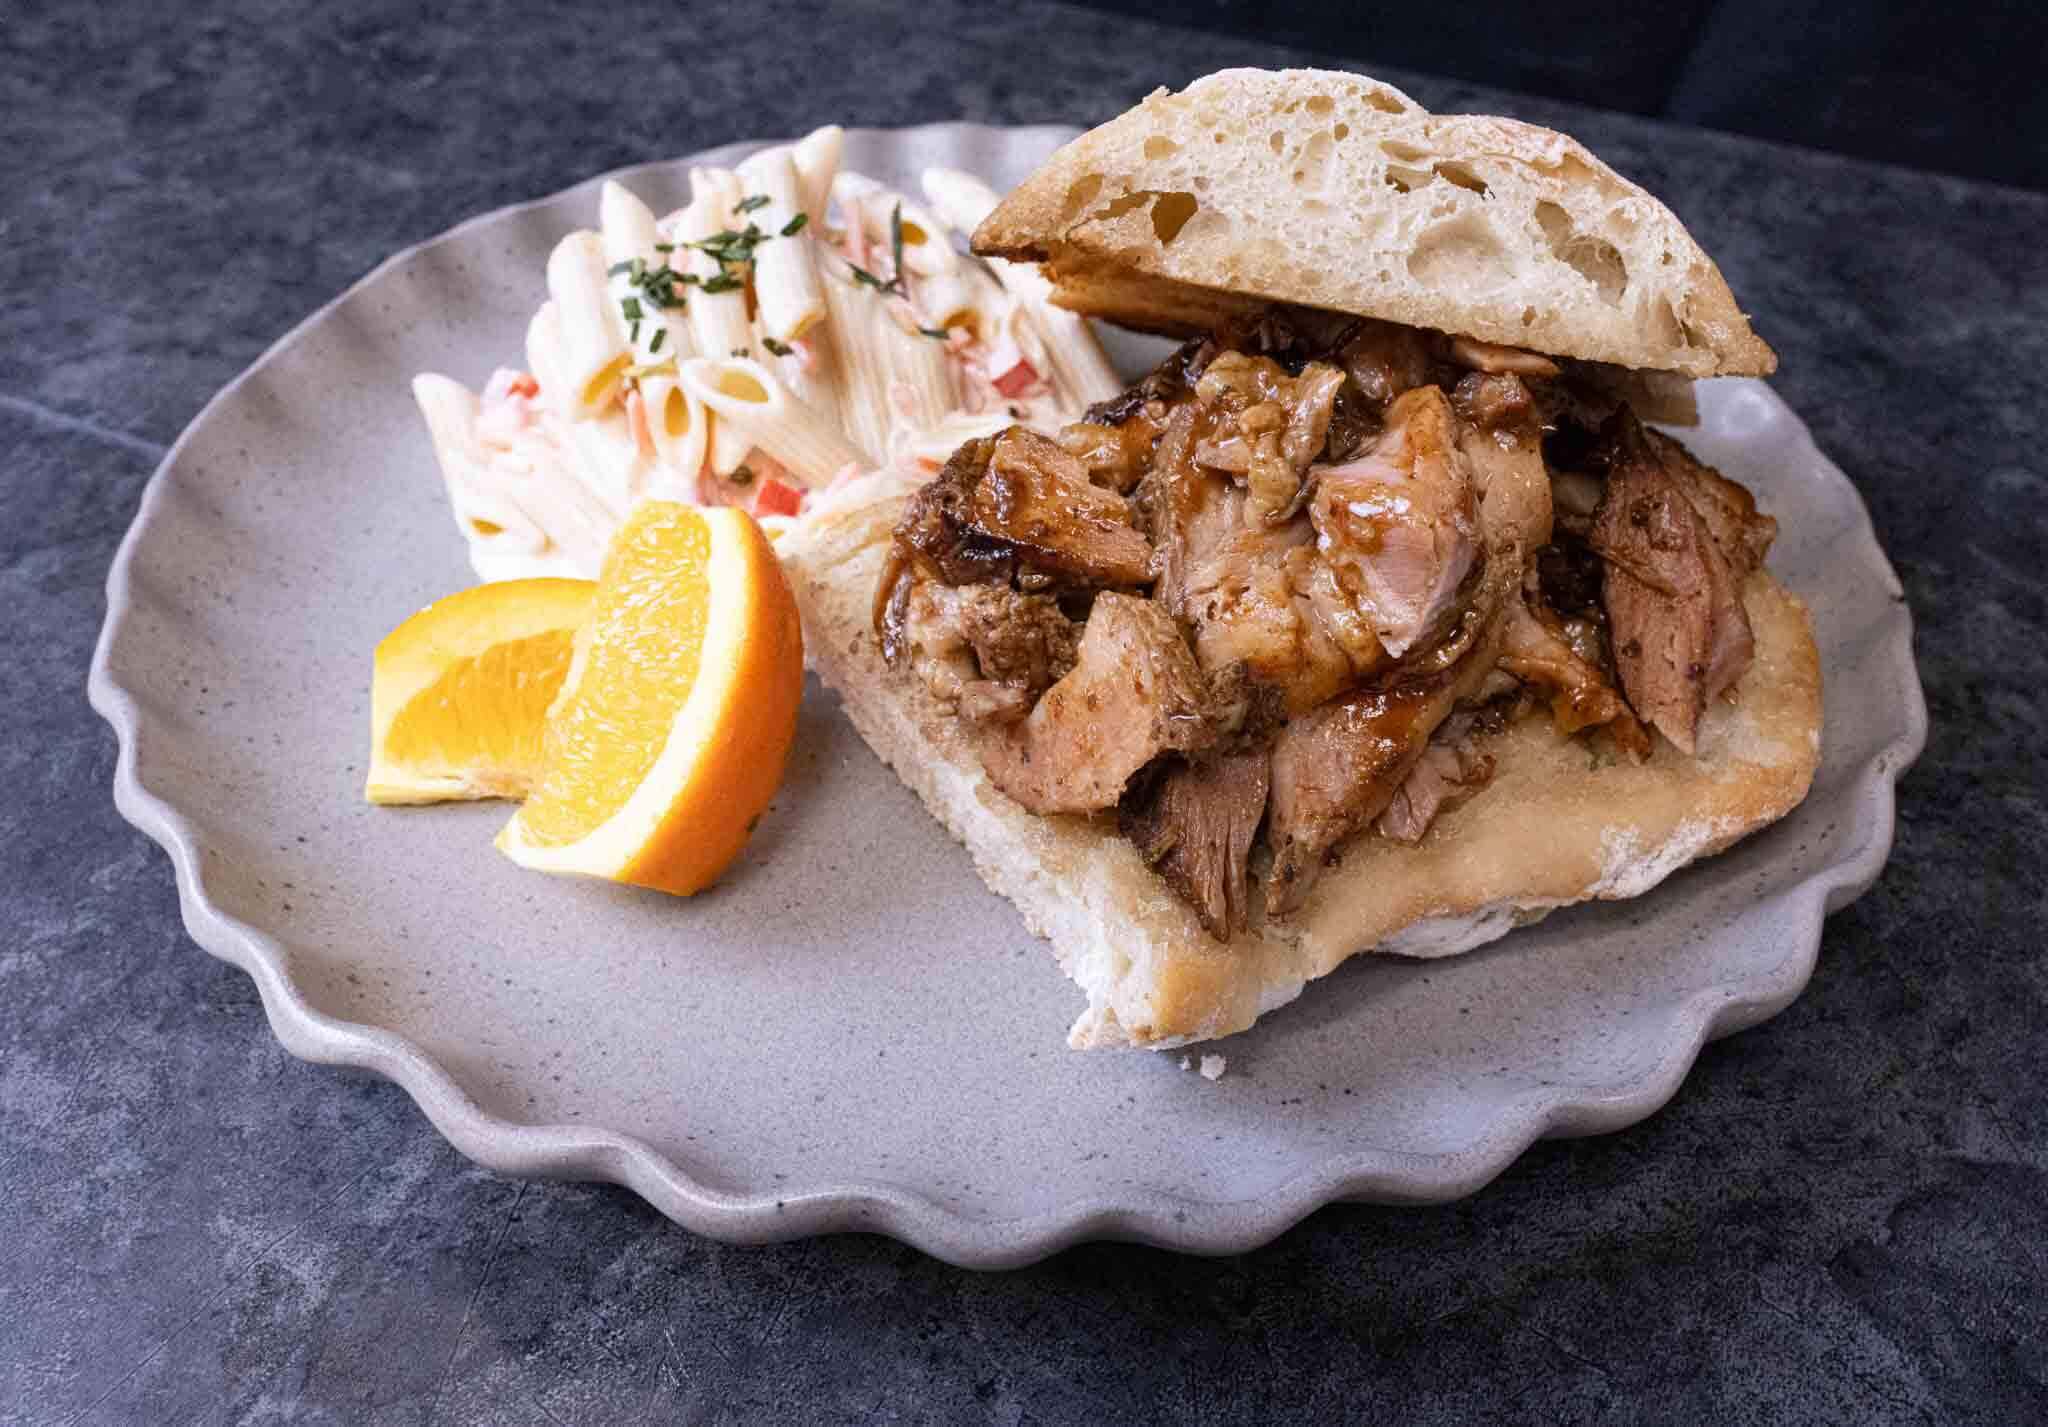 BBQ pulled pork sandwich on ciabatta bread, with penne pasta coleslaw